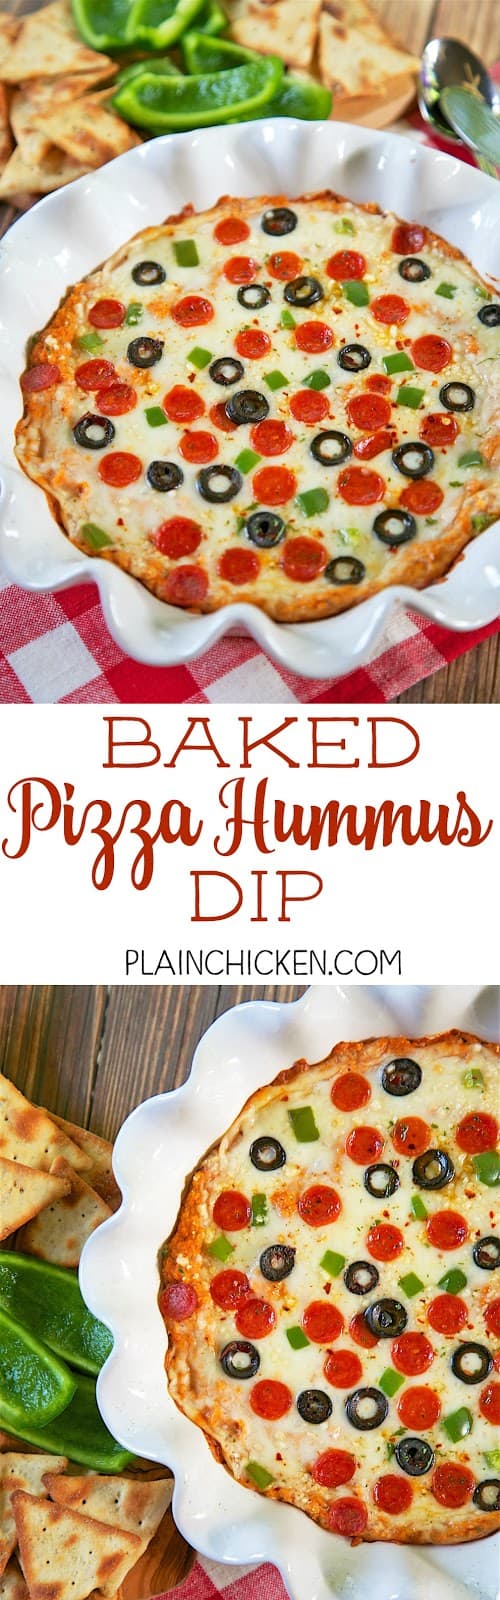 Baked Pizza Hummus Dip - quick homemade pizza hummus topped with mozzarella, parmesan and your favorite pizza toppings. Start with garbanzo beans and a pouch of Bush's Classic Hummus Made Easy, add tomato paste, garlic, Italian Seasoning and parmesan cheese. Bake for 15 minutes. Serve with bell pepper slices and pita chips. Great for a quick party appetizer or alternative for pizza night!